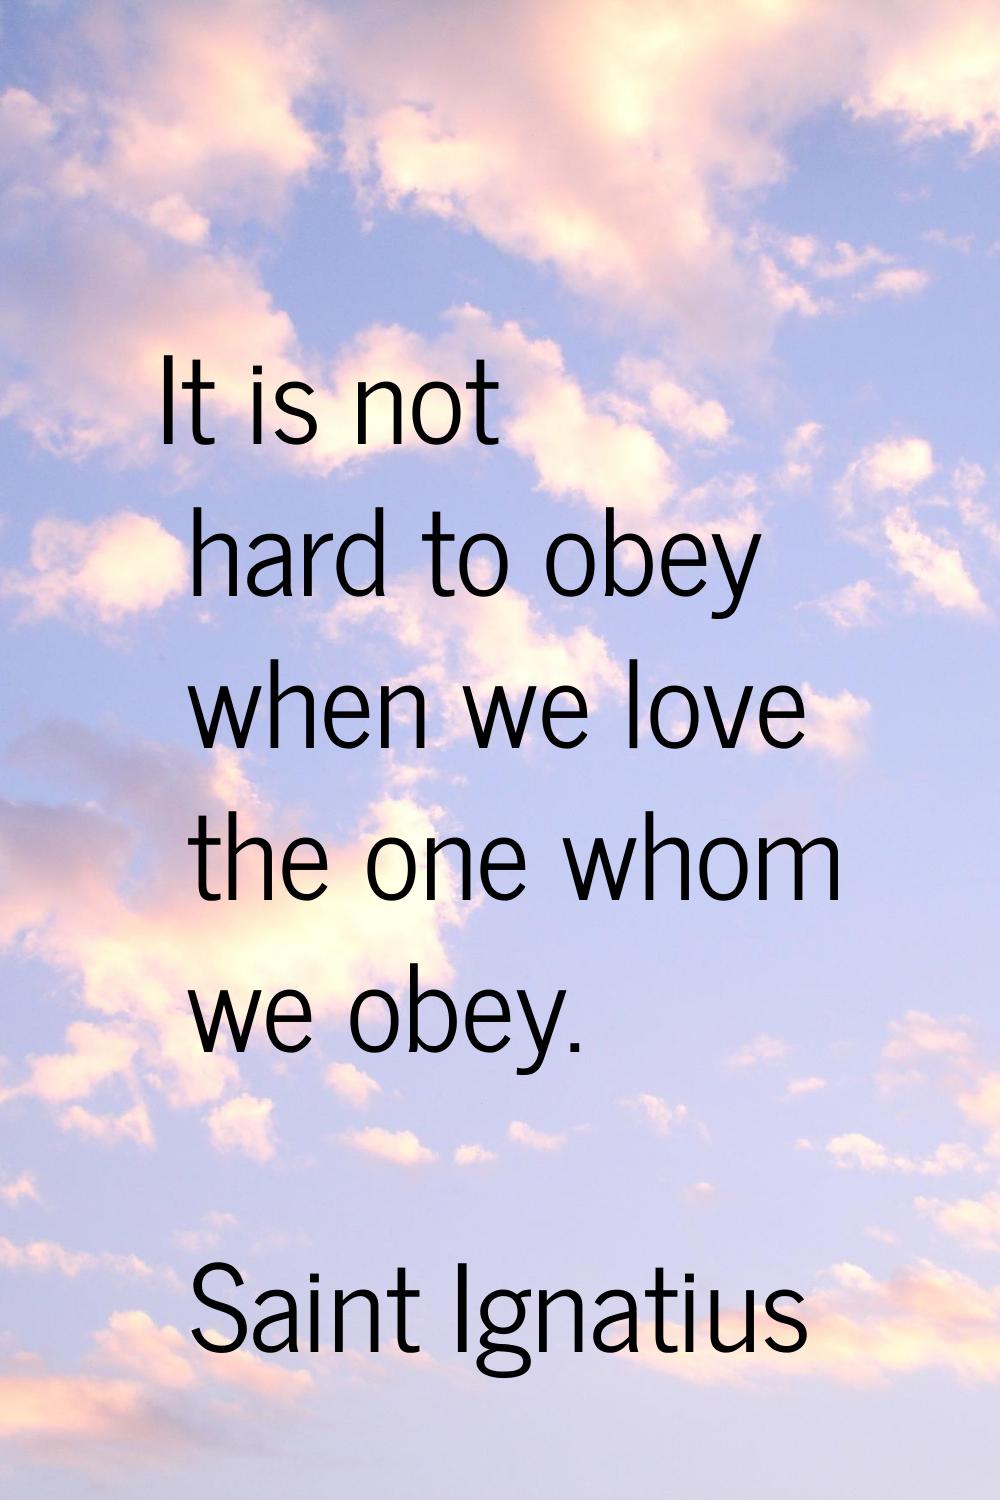 It is not hard to obey when we love the one whom we obey.